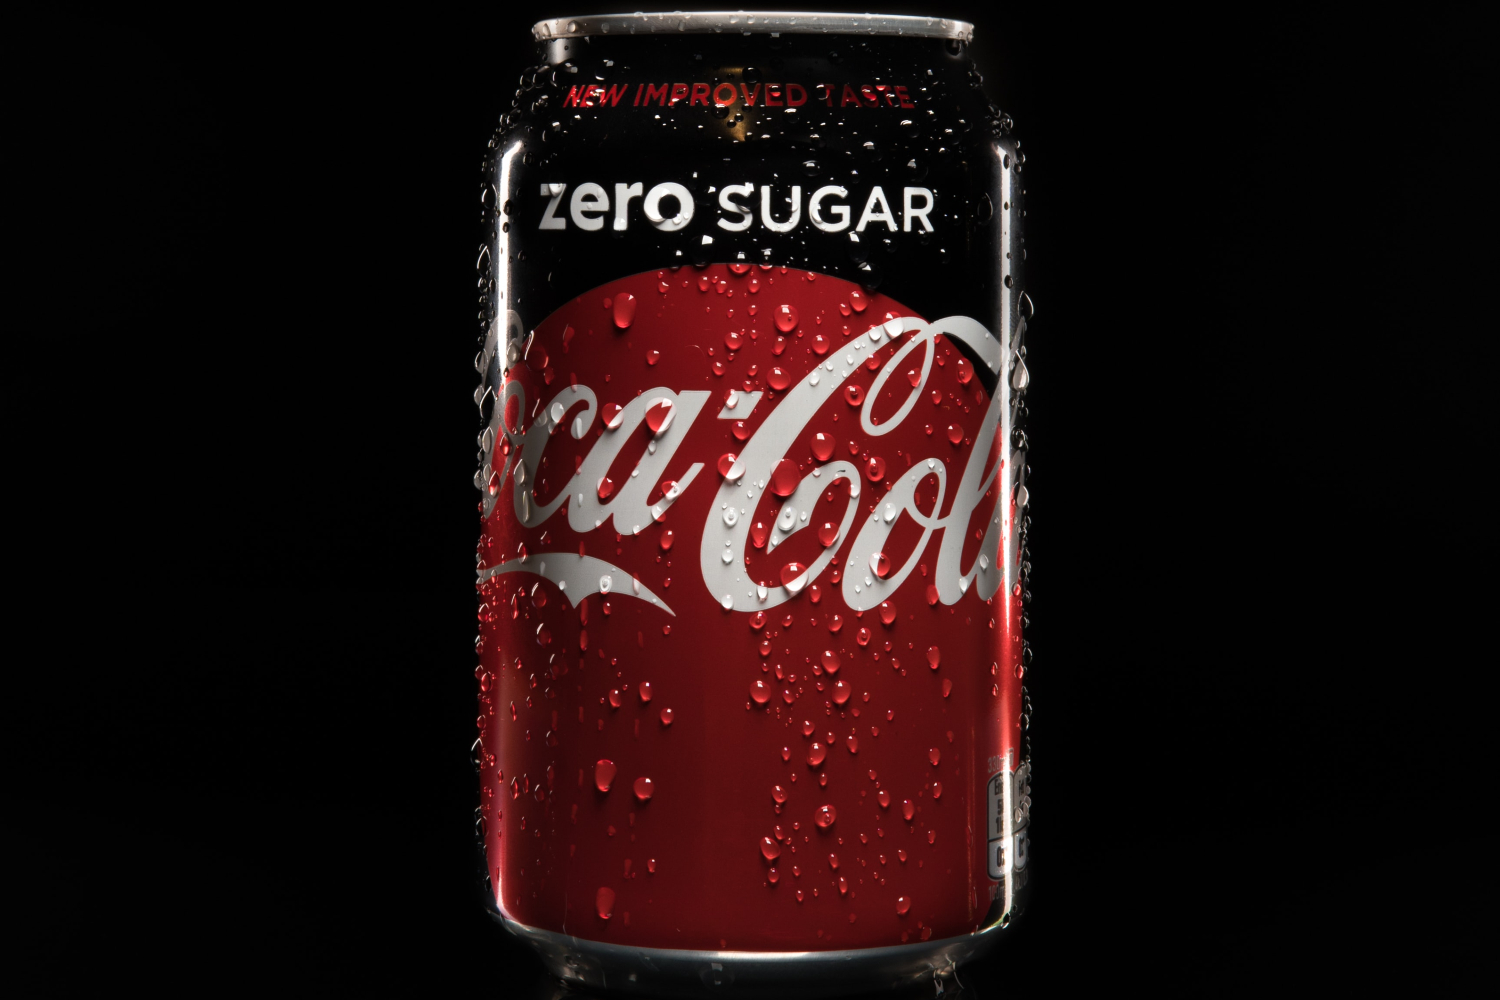 A can of coke zero on black background. We hope the new recipe is as bad as people fear.